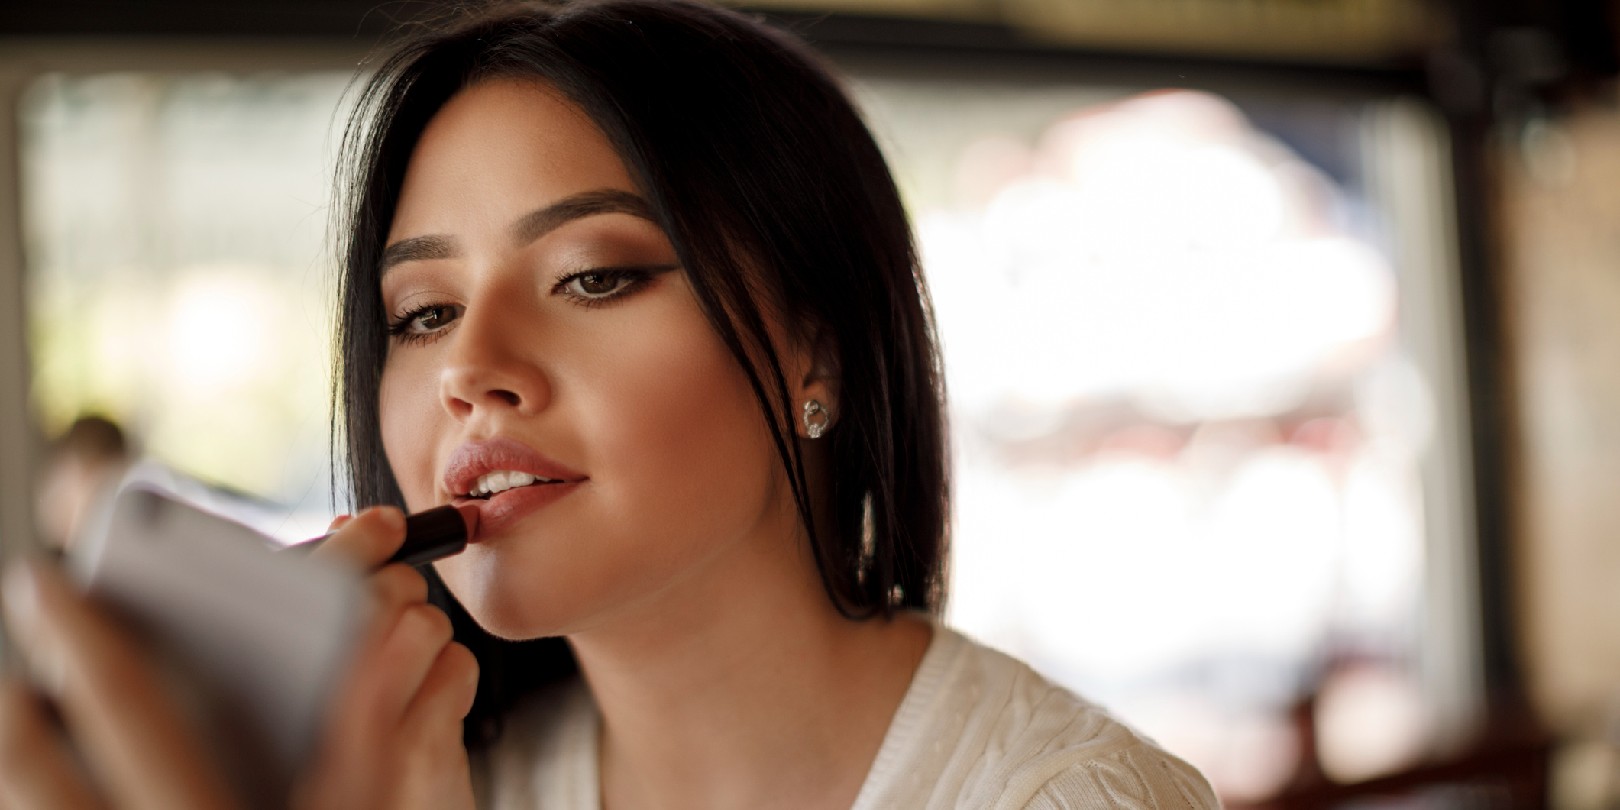 Young woman applying lipstick at a cafe